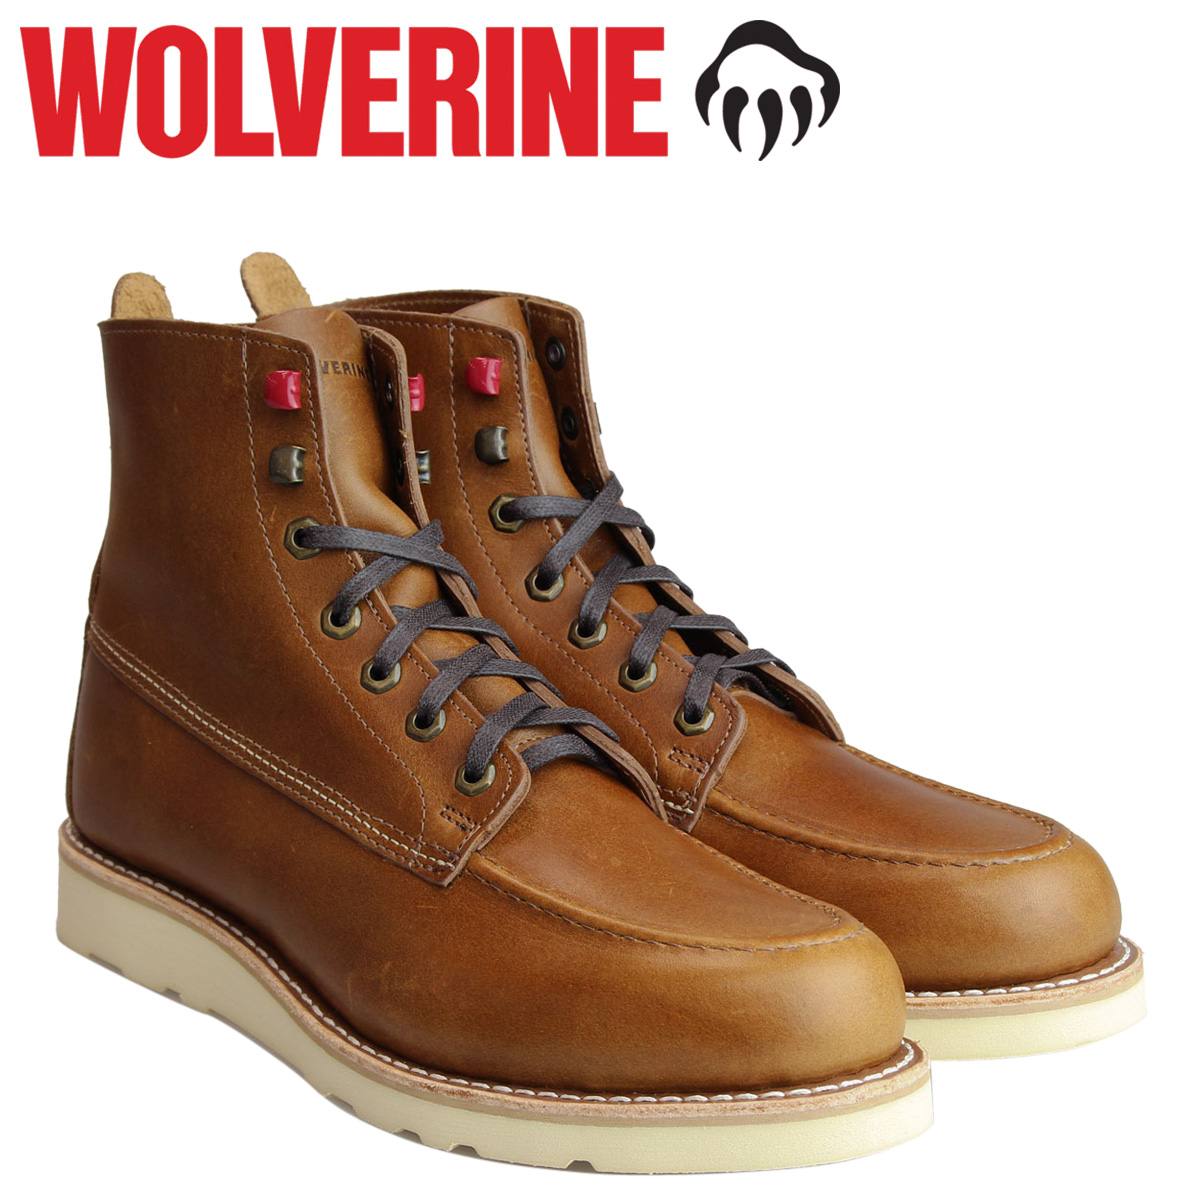 wolverine louis wedge boot review